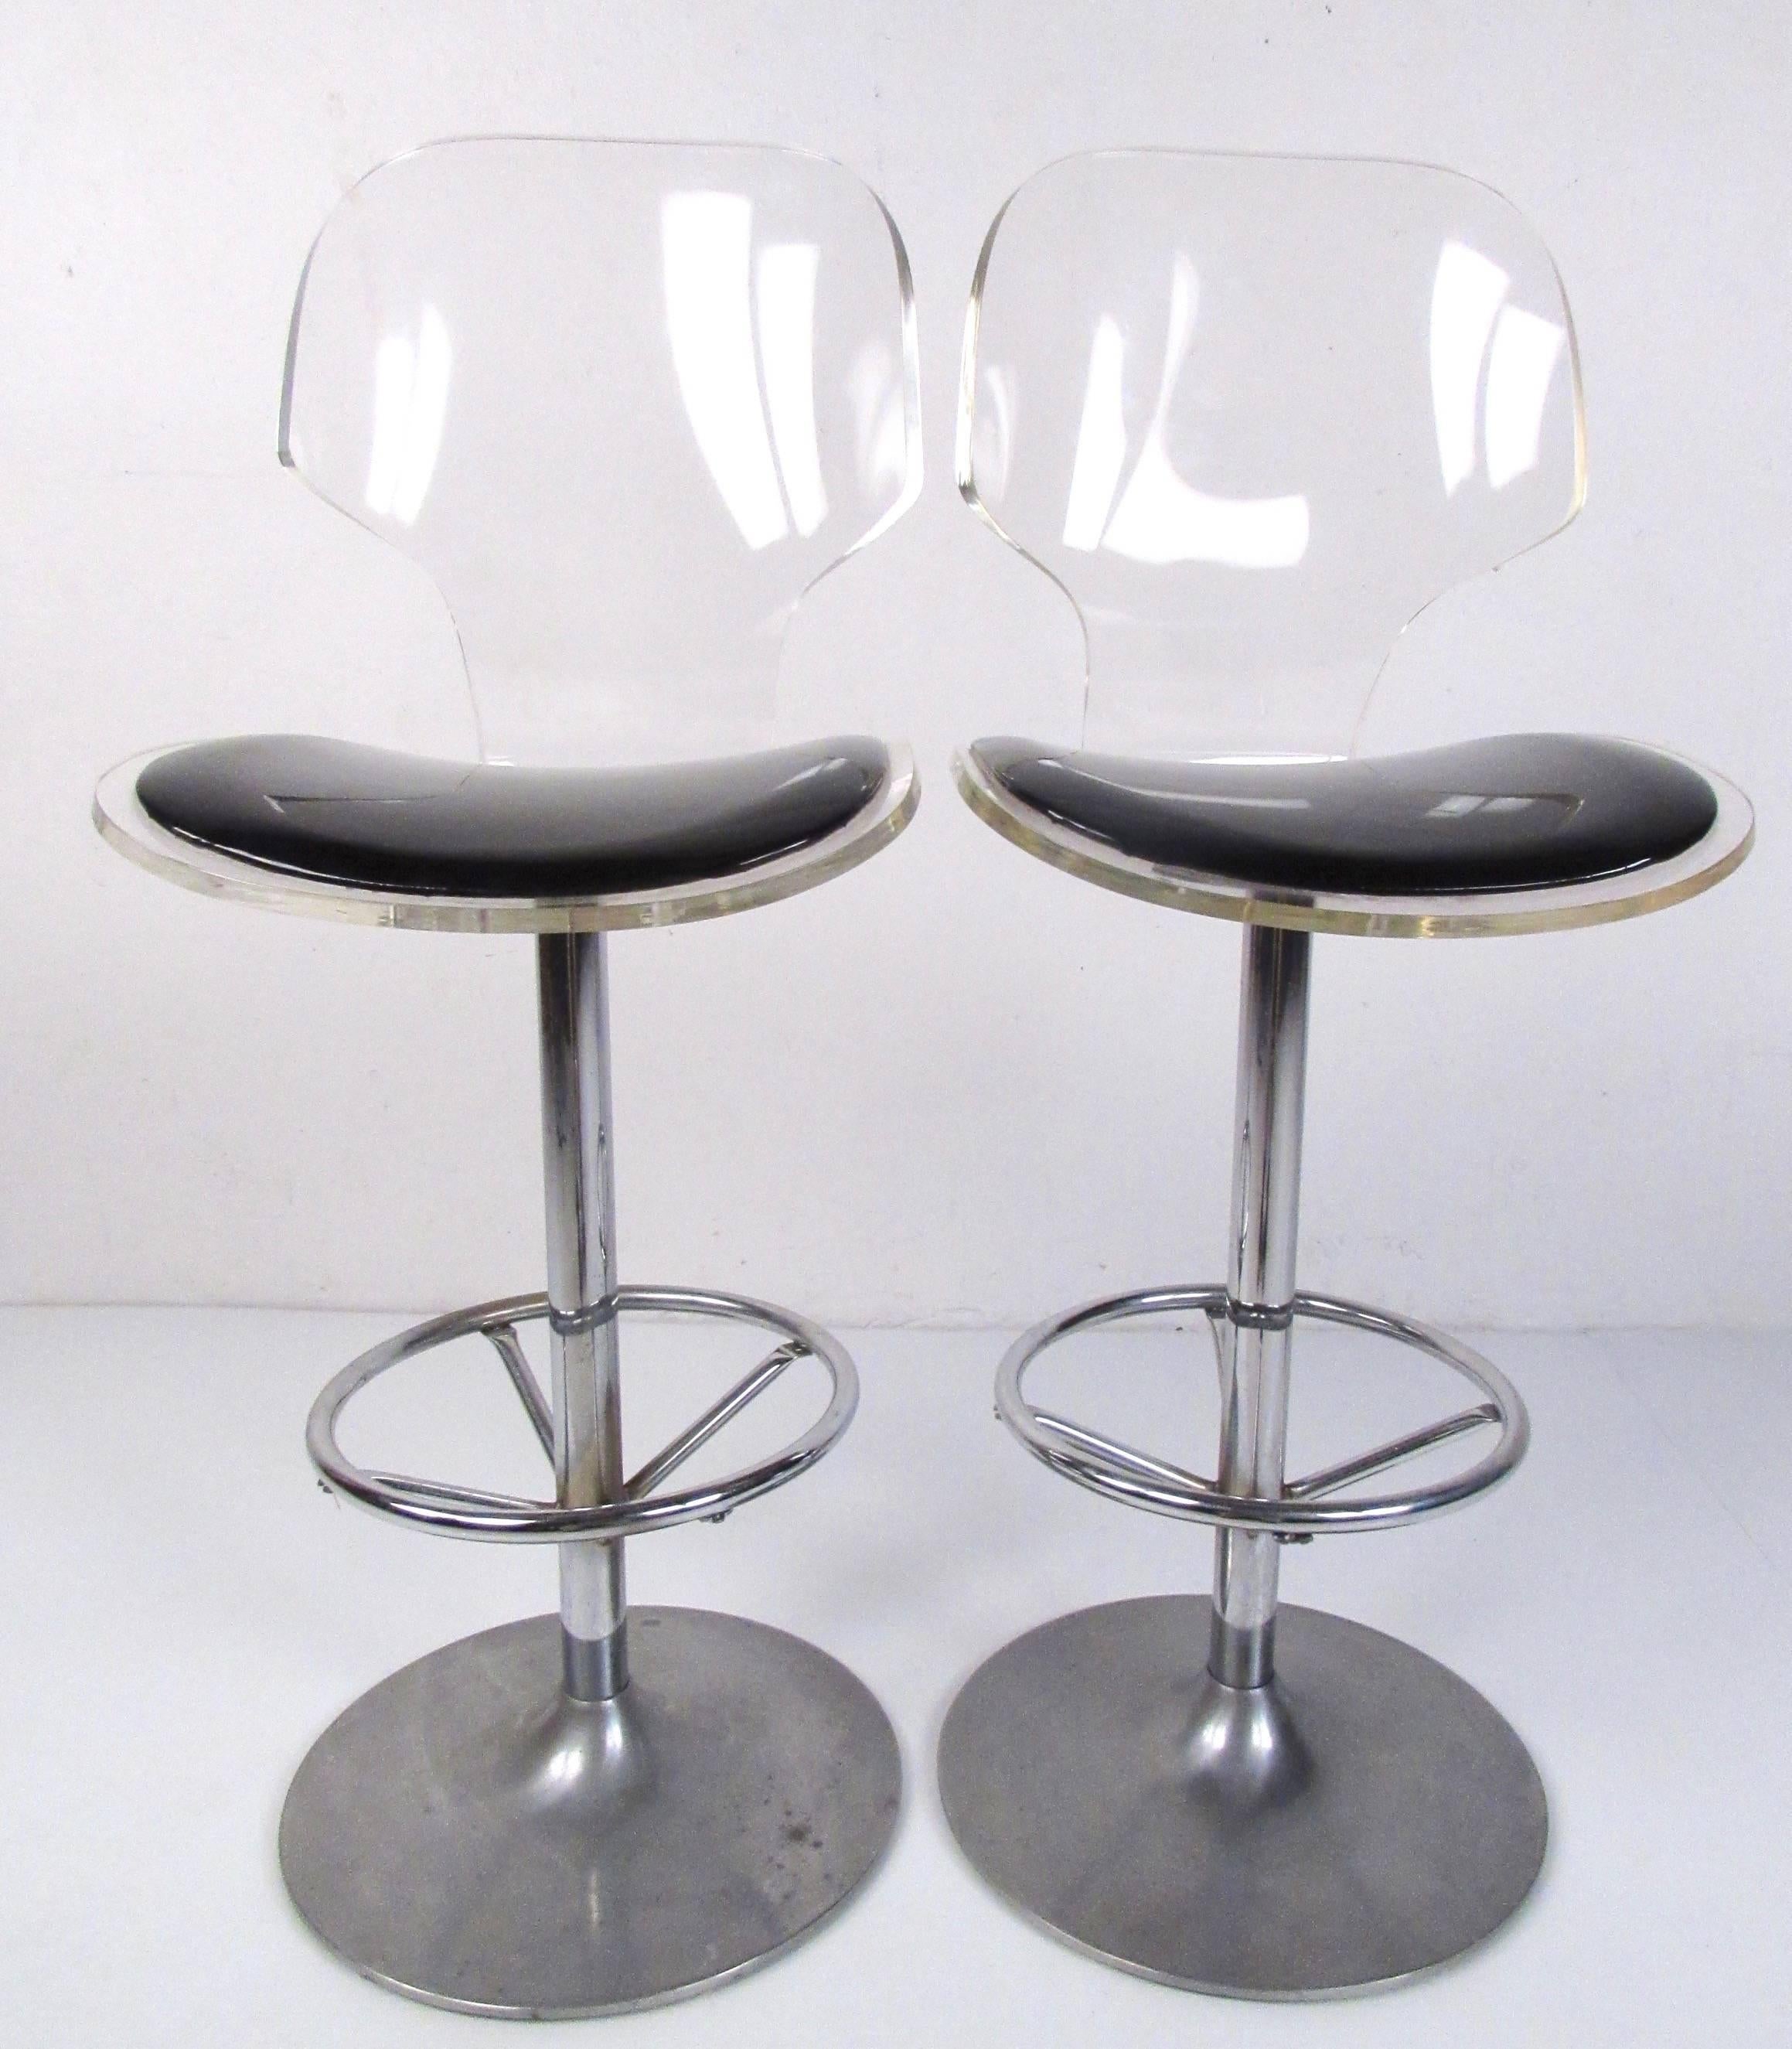 This stylish pair of vintage modern acrylic barstools by Hill manufacturing feature swivel aluminum bases with circular footrests and make a unique and comfortable midcentury-style addition to any interior. Measure: 29-inch seat height makes these